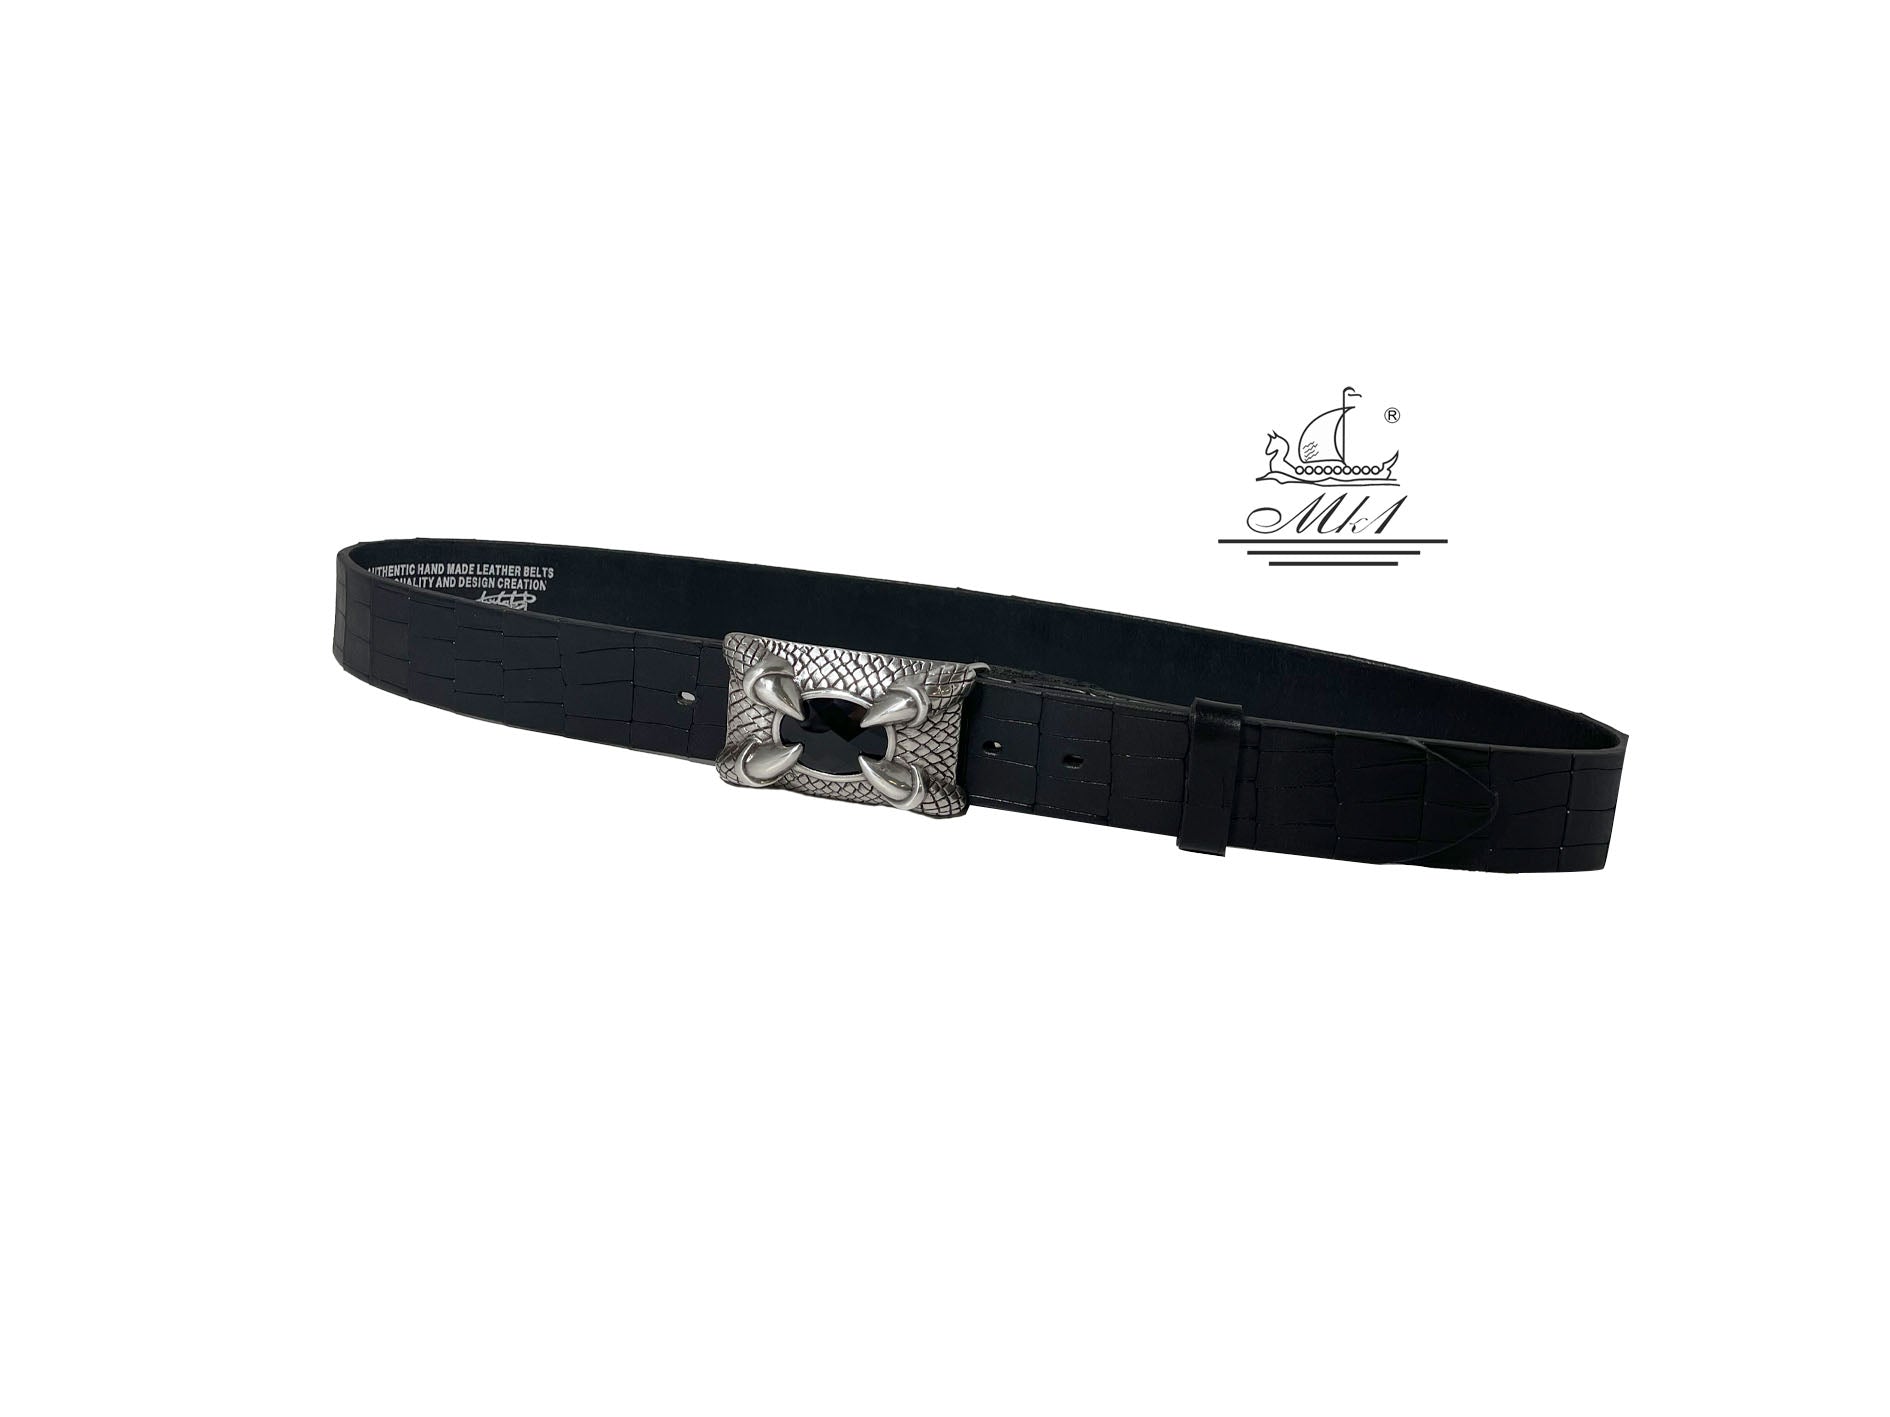 Unisex 4cm wide belt handcrafted from black leather with croco design. 101120/40B/KR